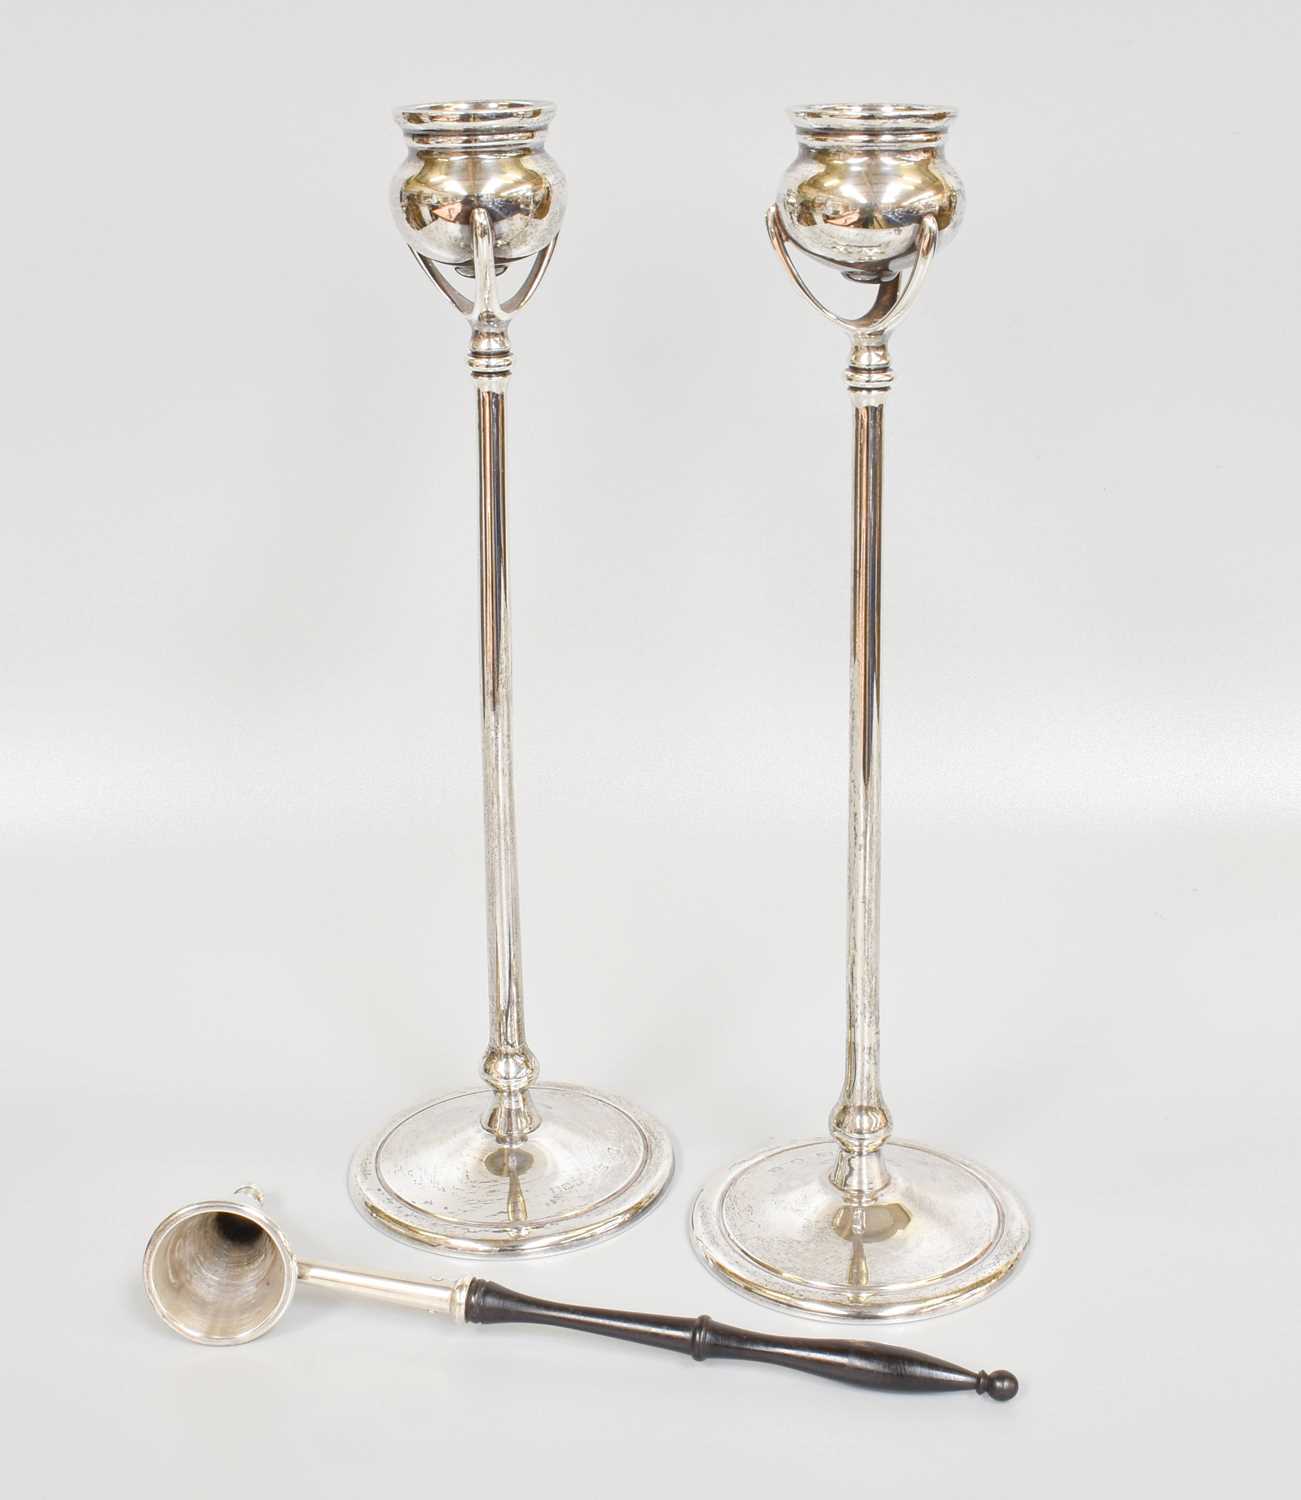 A Pair of Elizabeth II Silver Candlesticks, by Whitehill Silver Co., London, 1997, on spreading